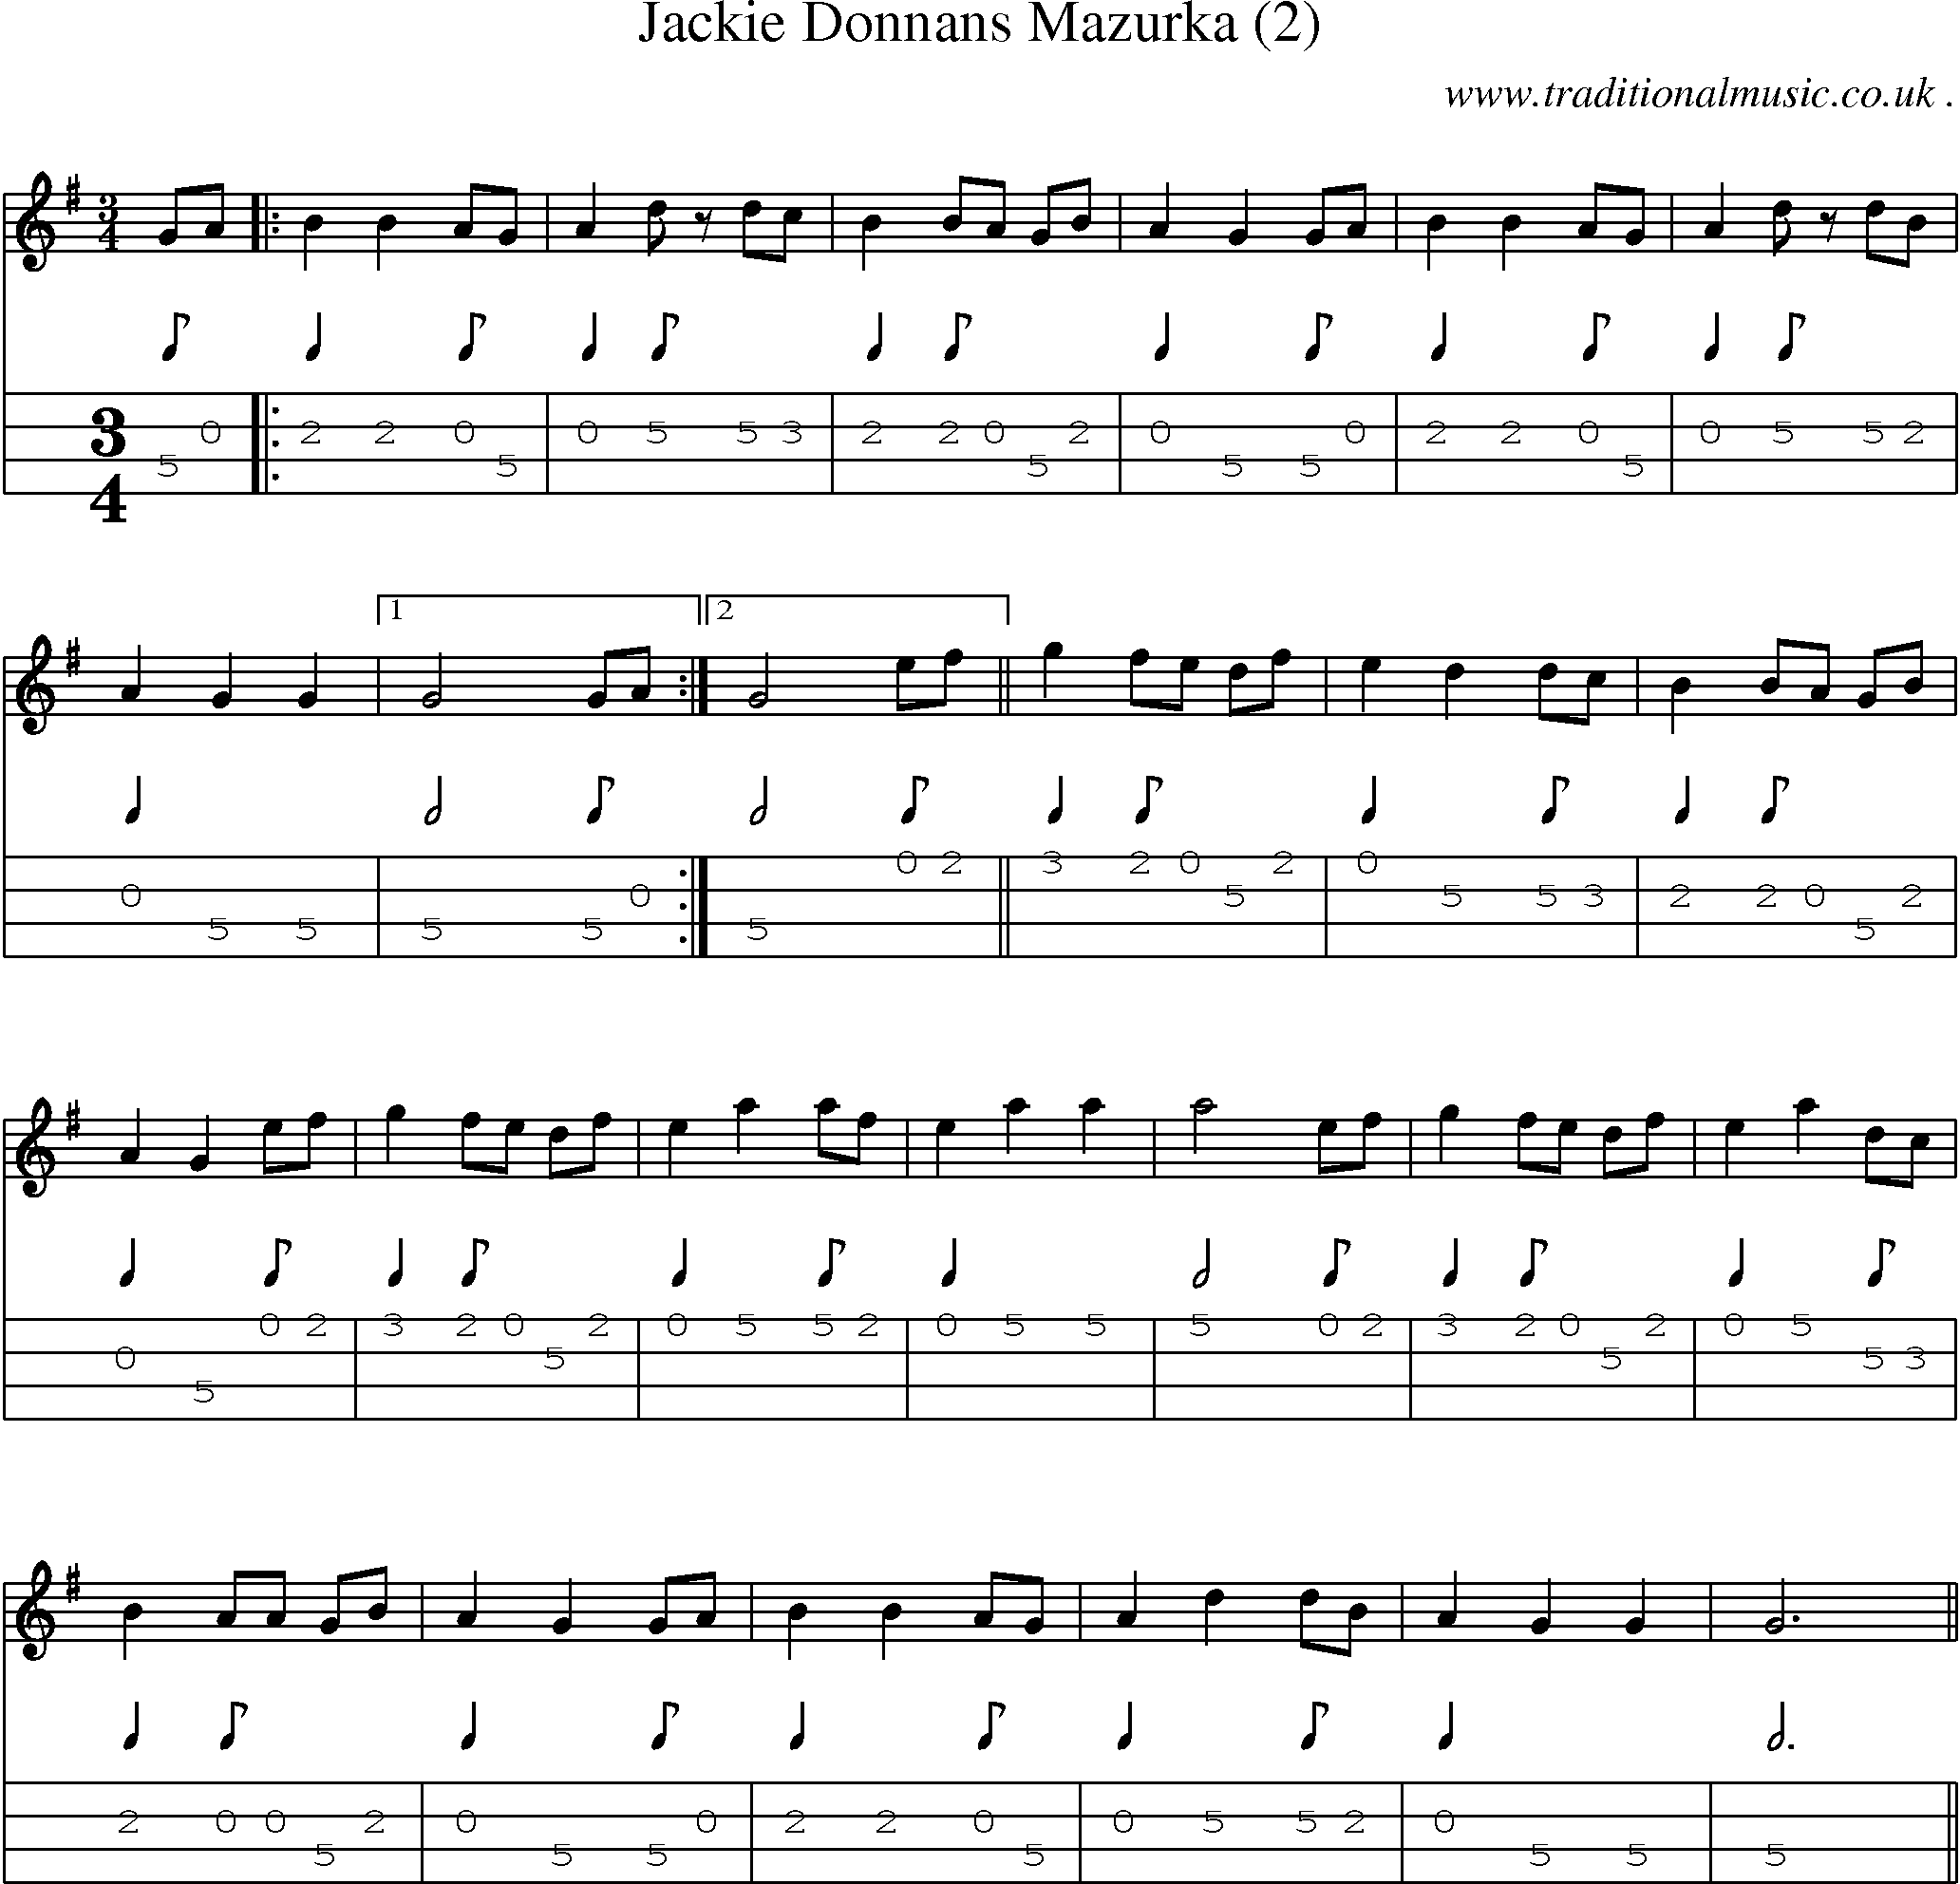 Sheet-Music and Mandolin Tabs for Jackie Donnans Mazurka (2)